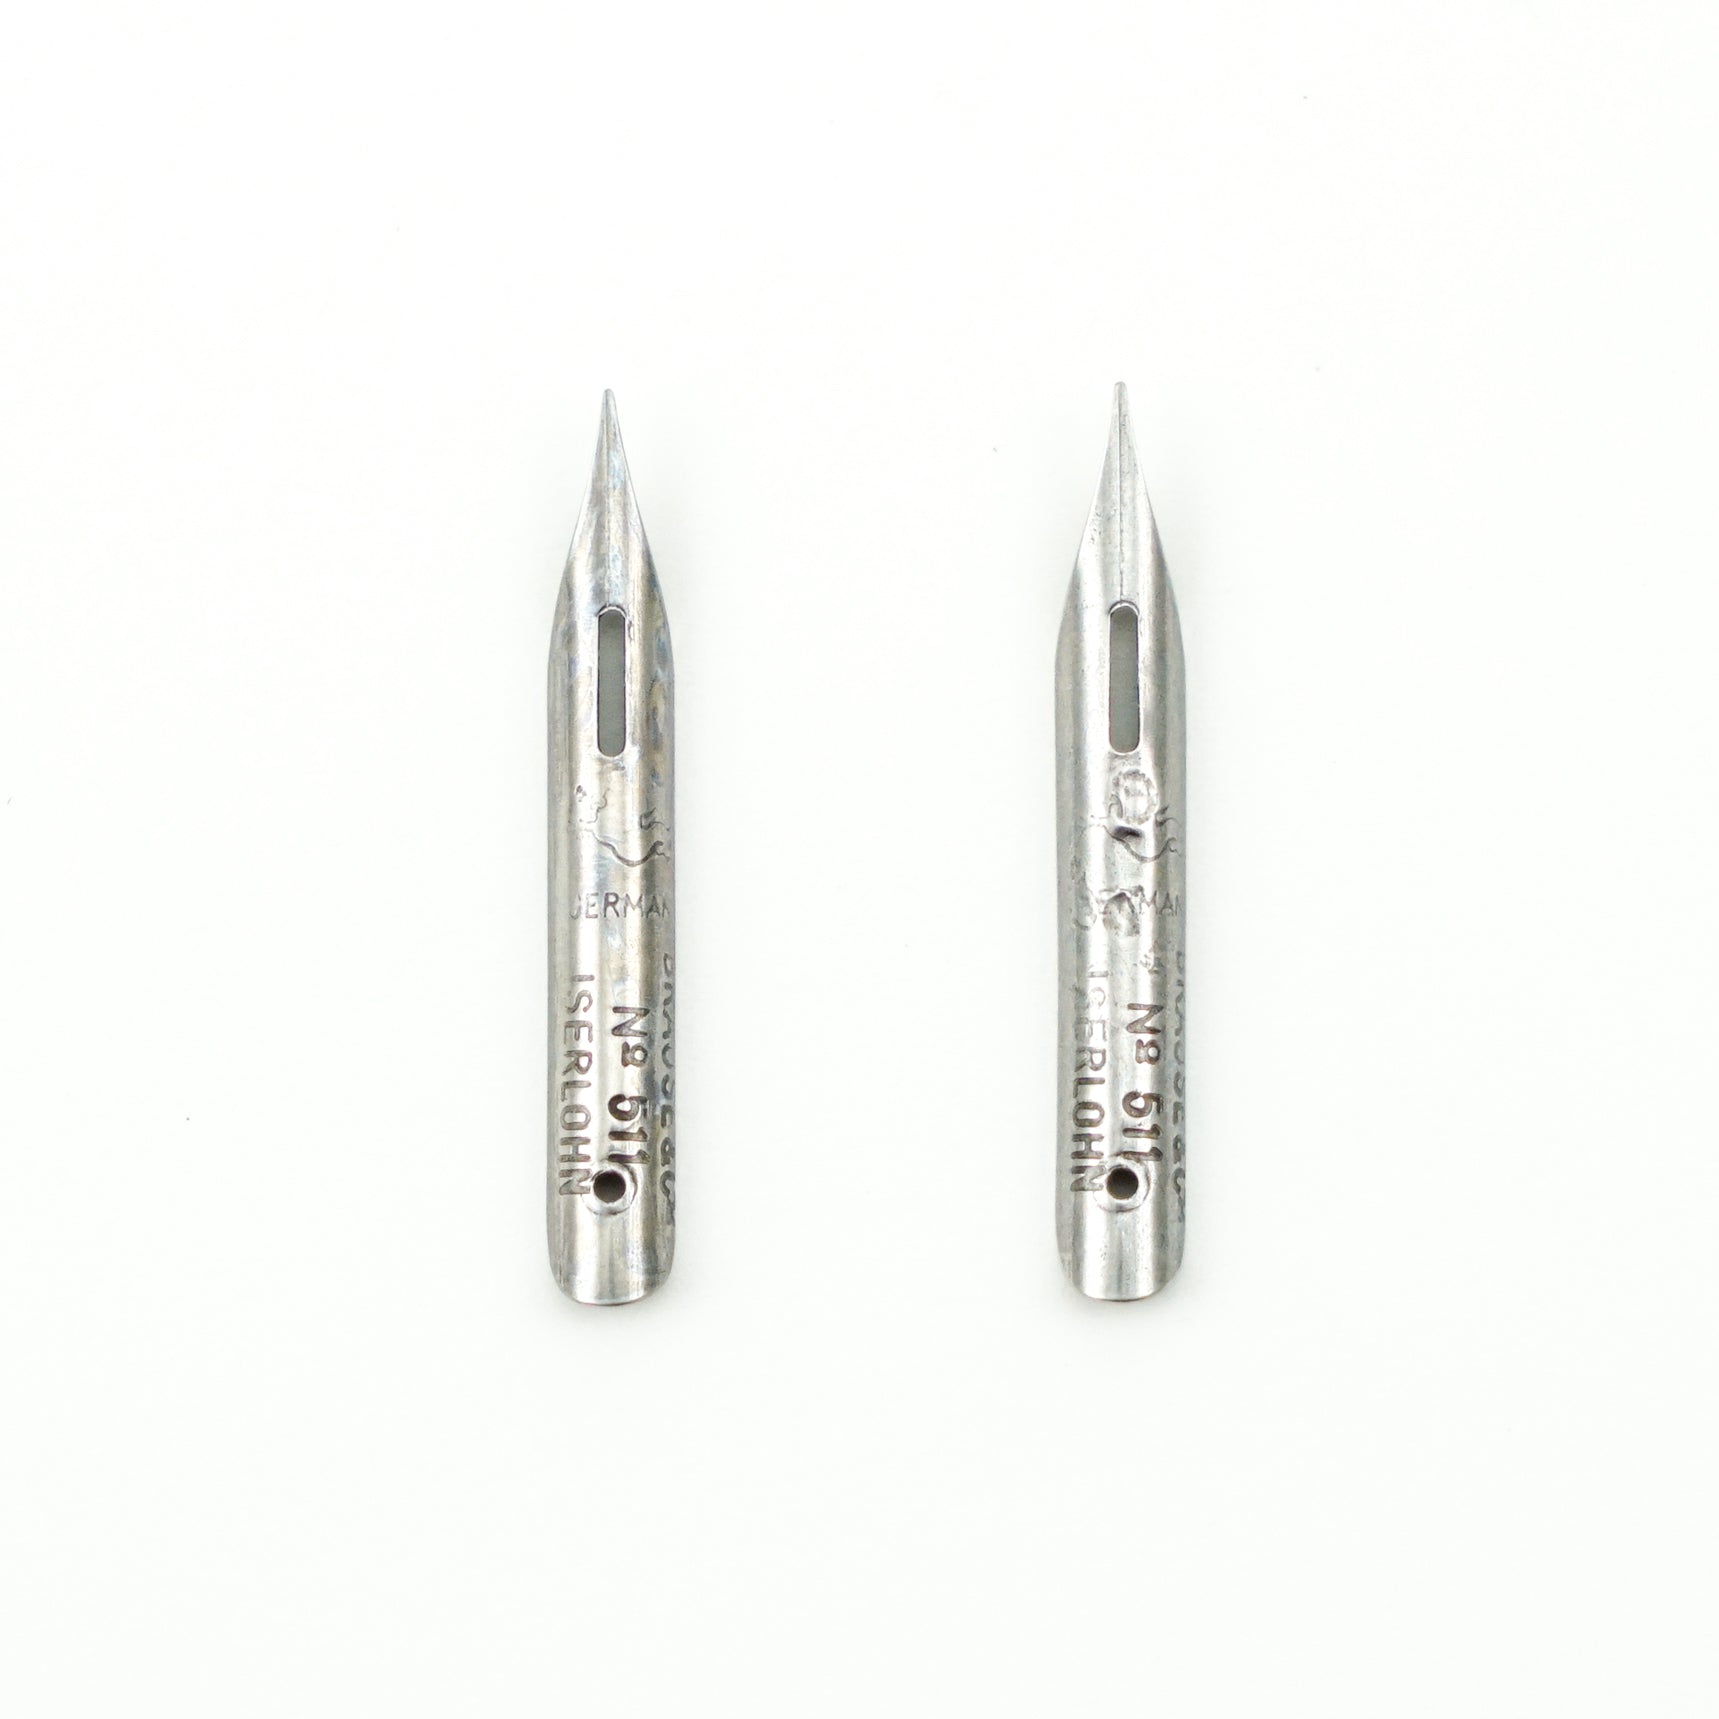 Brause 511 Drawing and Calligraphy Nibs - 2/pack